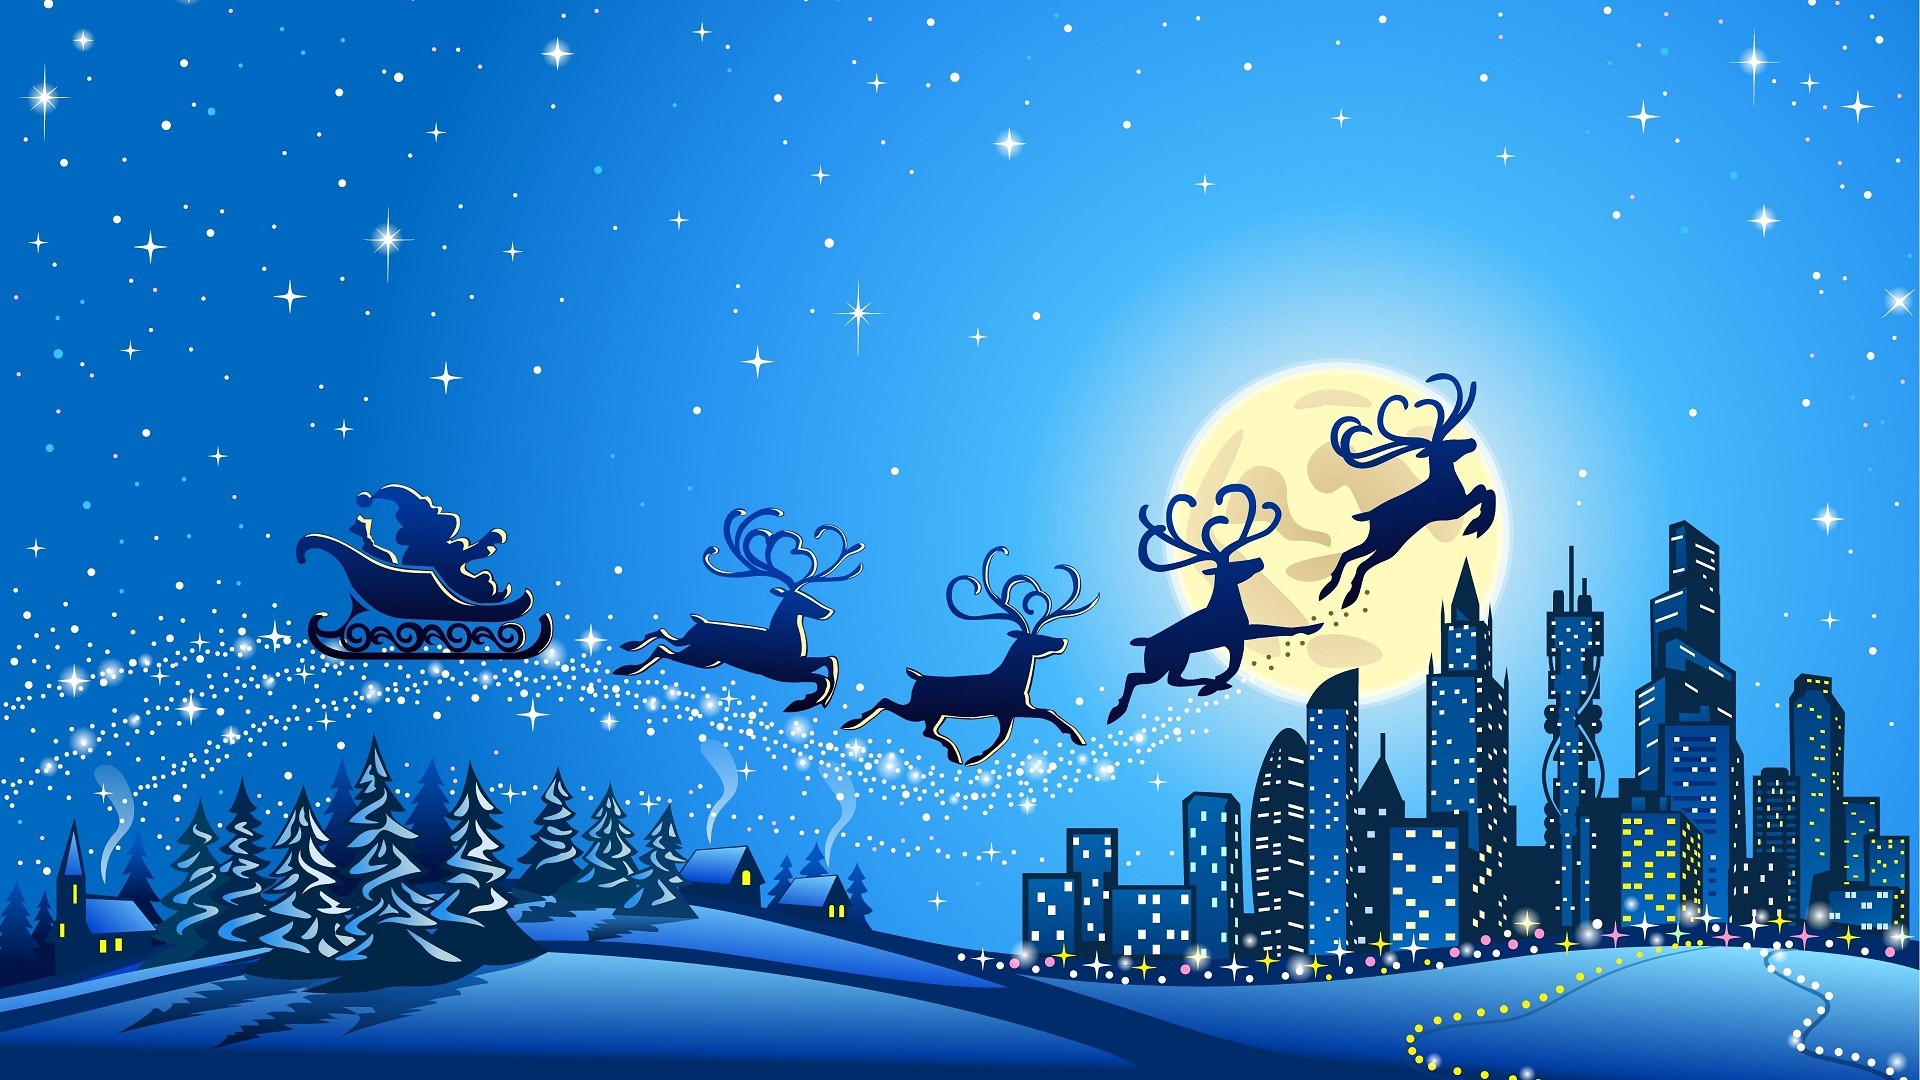 1920x1080 Merry-christmas-wallpaper-Beautiful15-collection-merry-christmas-and-